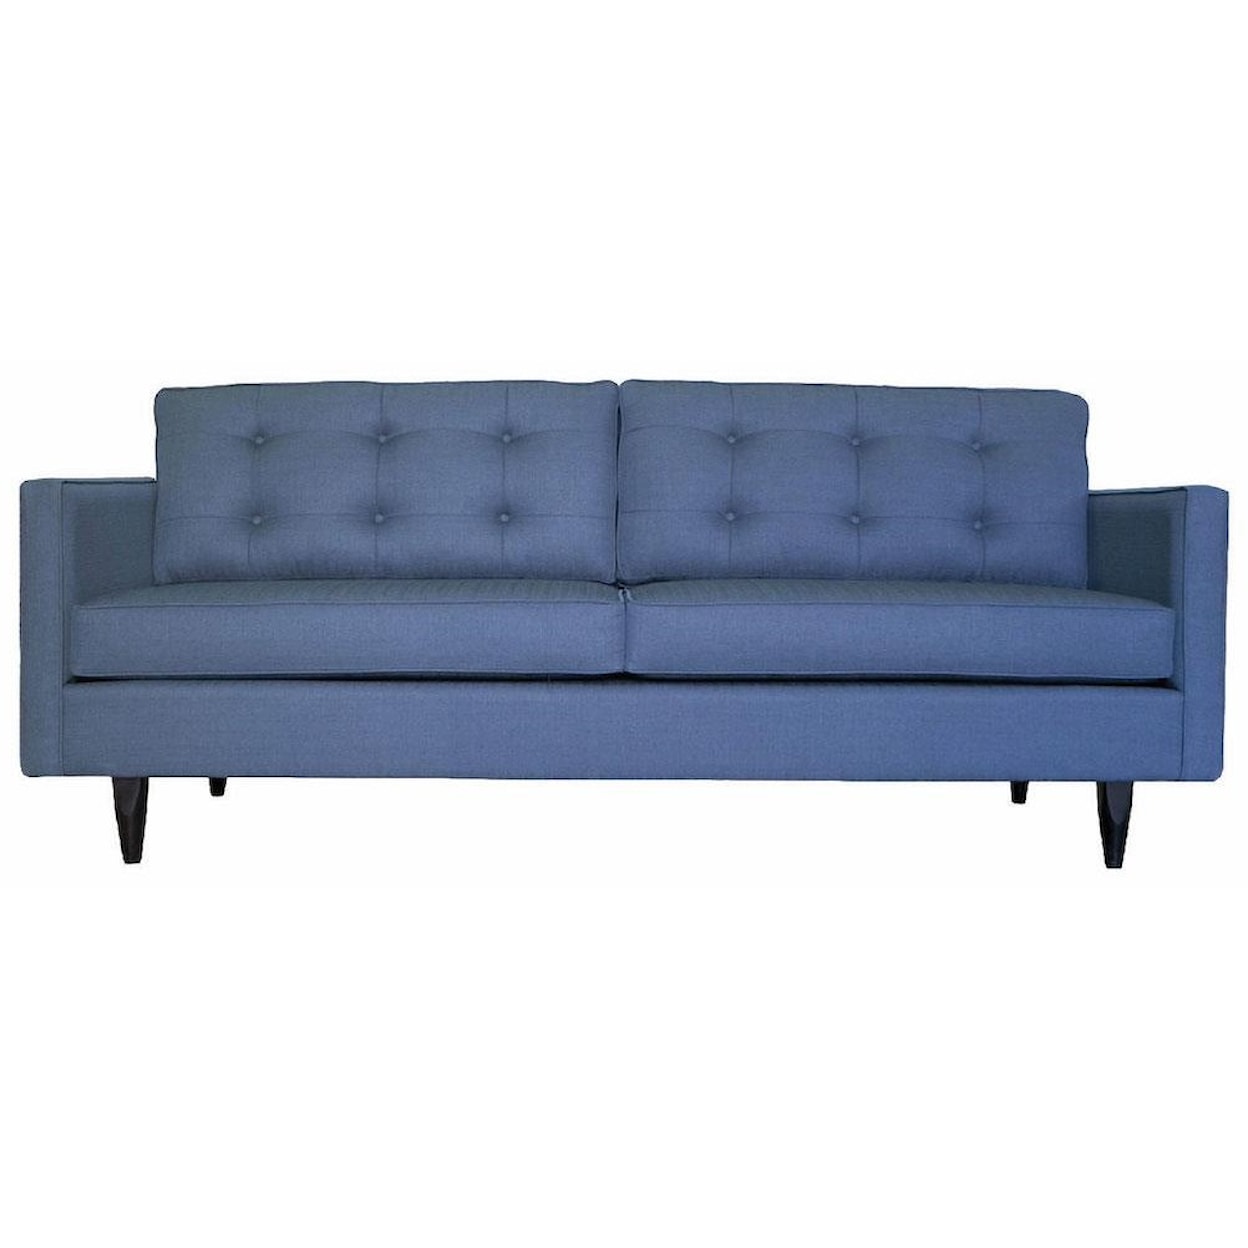 Sussex Upholstery Co. Tess 2 Cushion Sofa